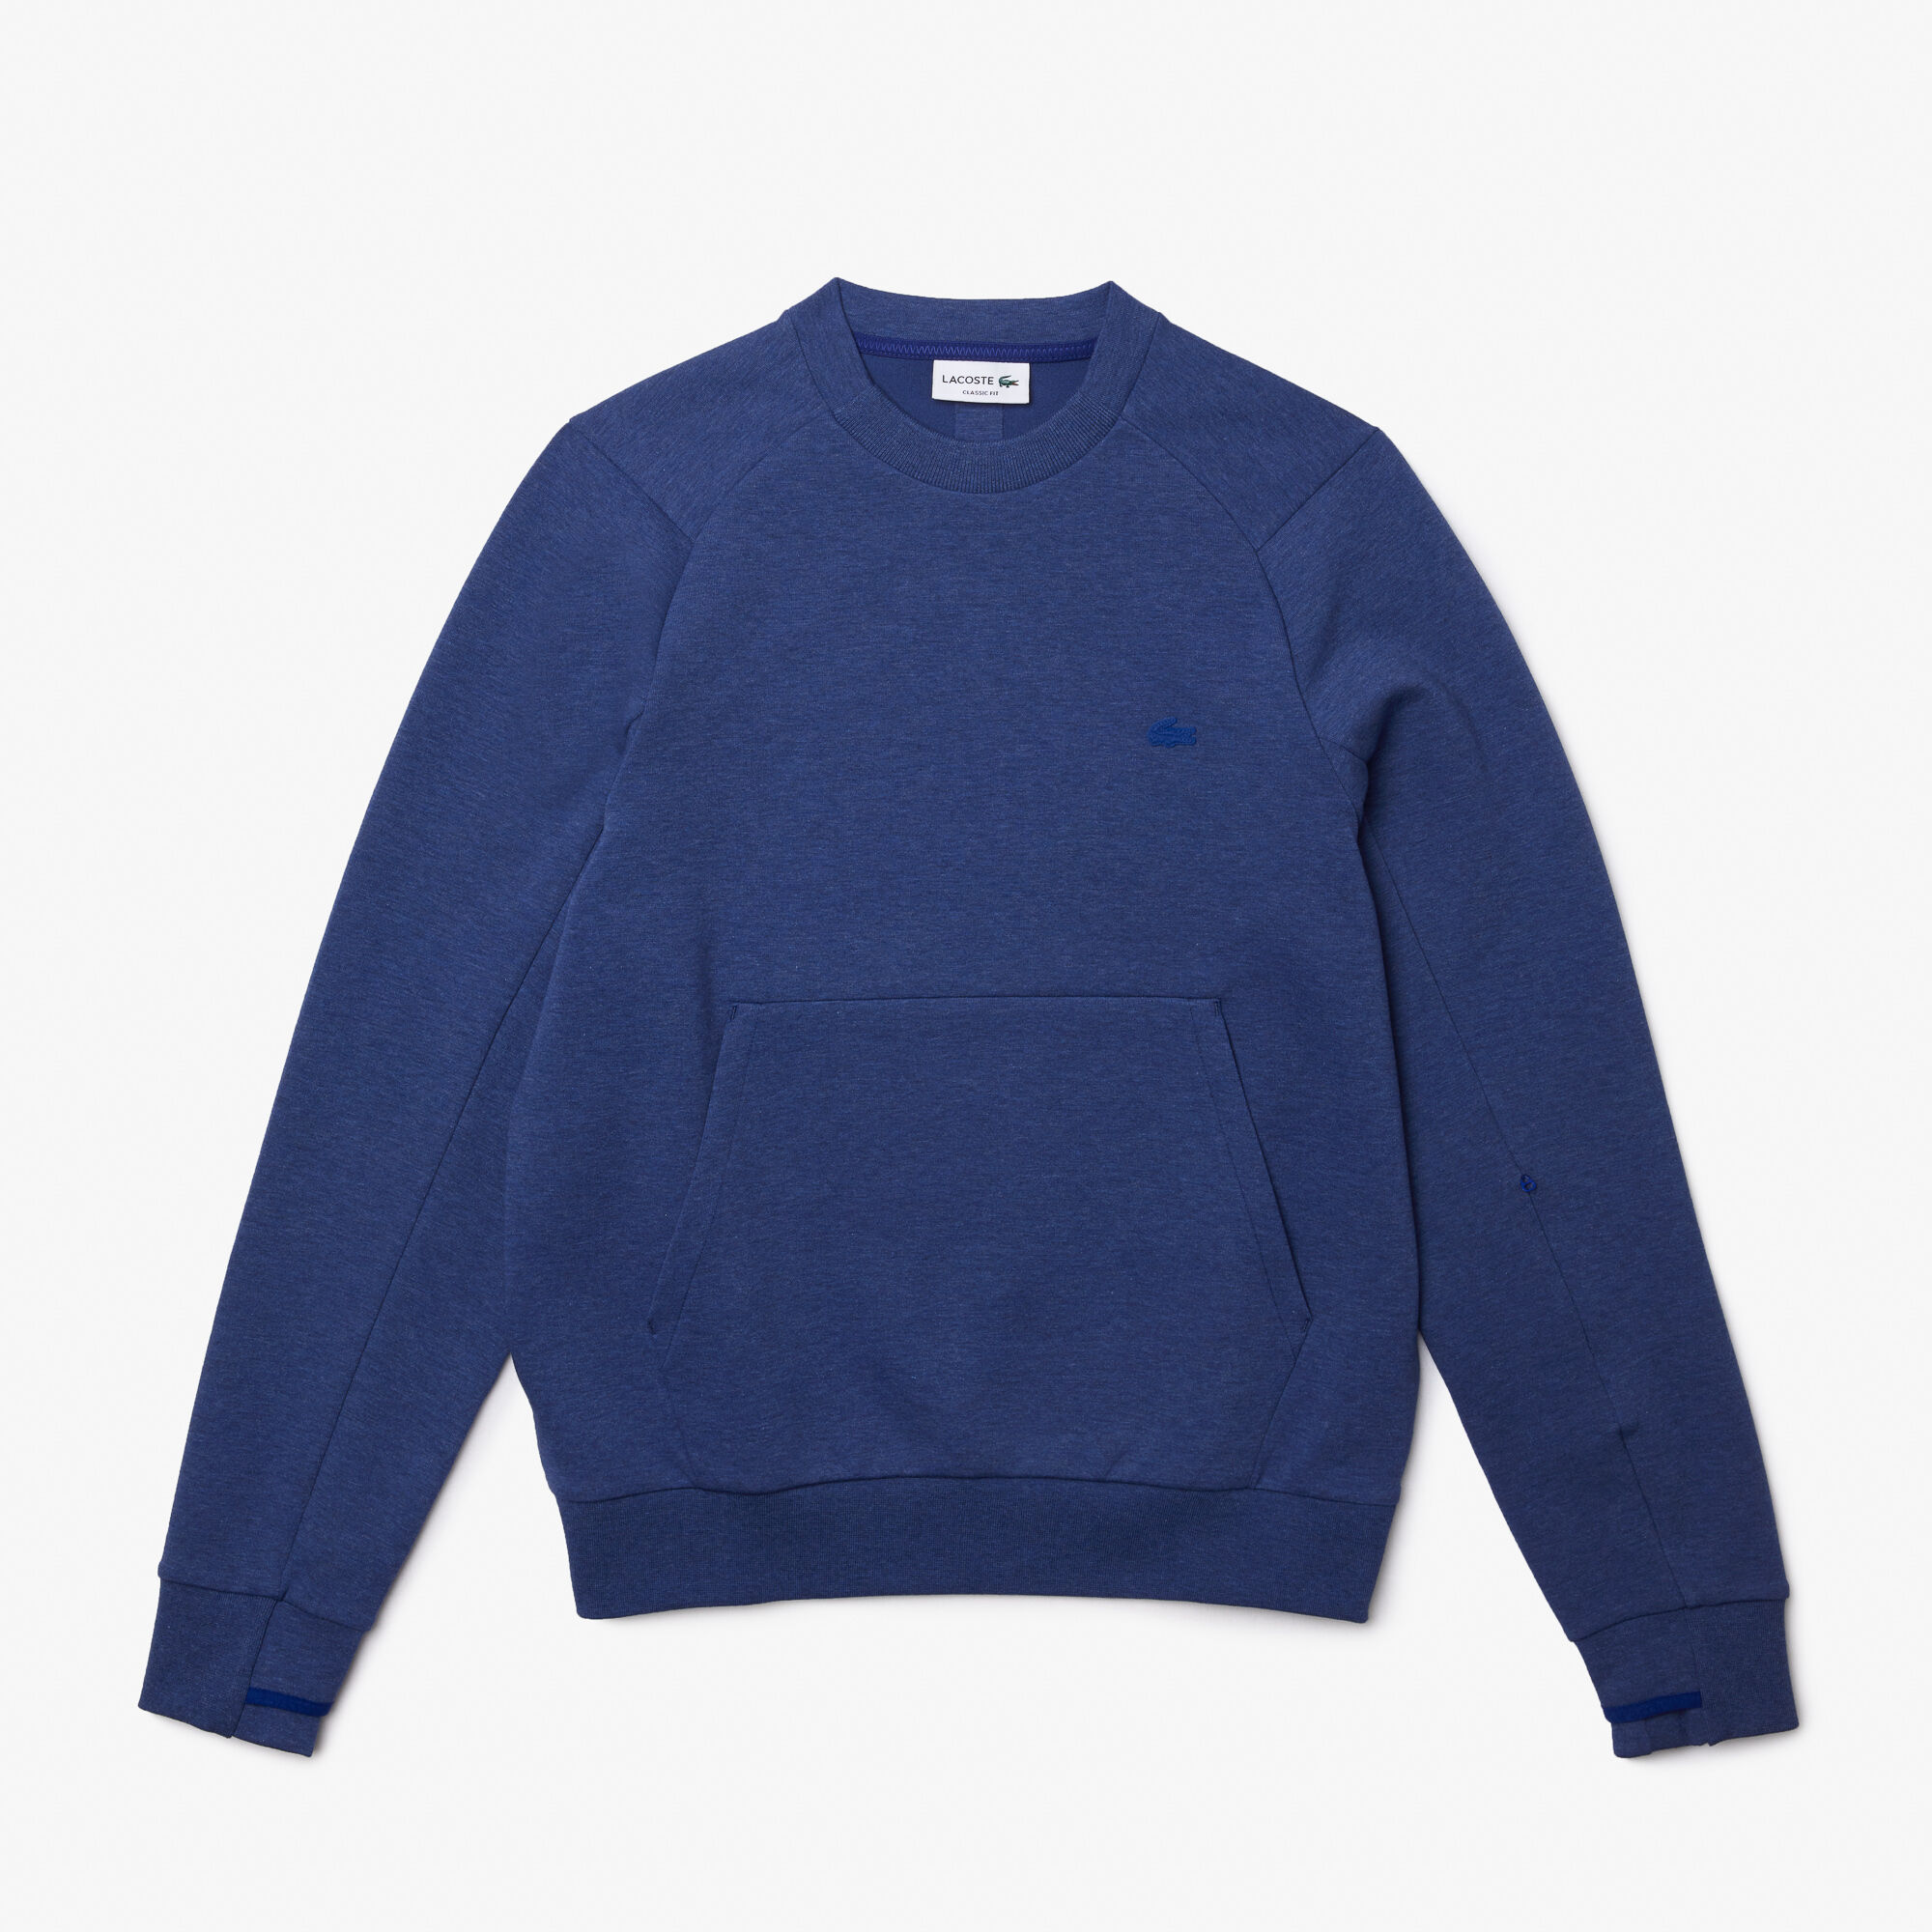 All Sweatshirts | Lacoste Clothing | LACOSTE